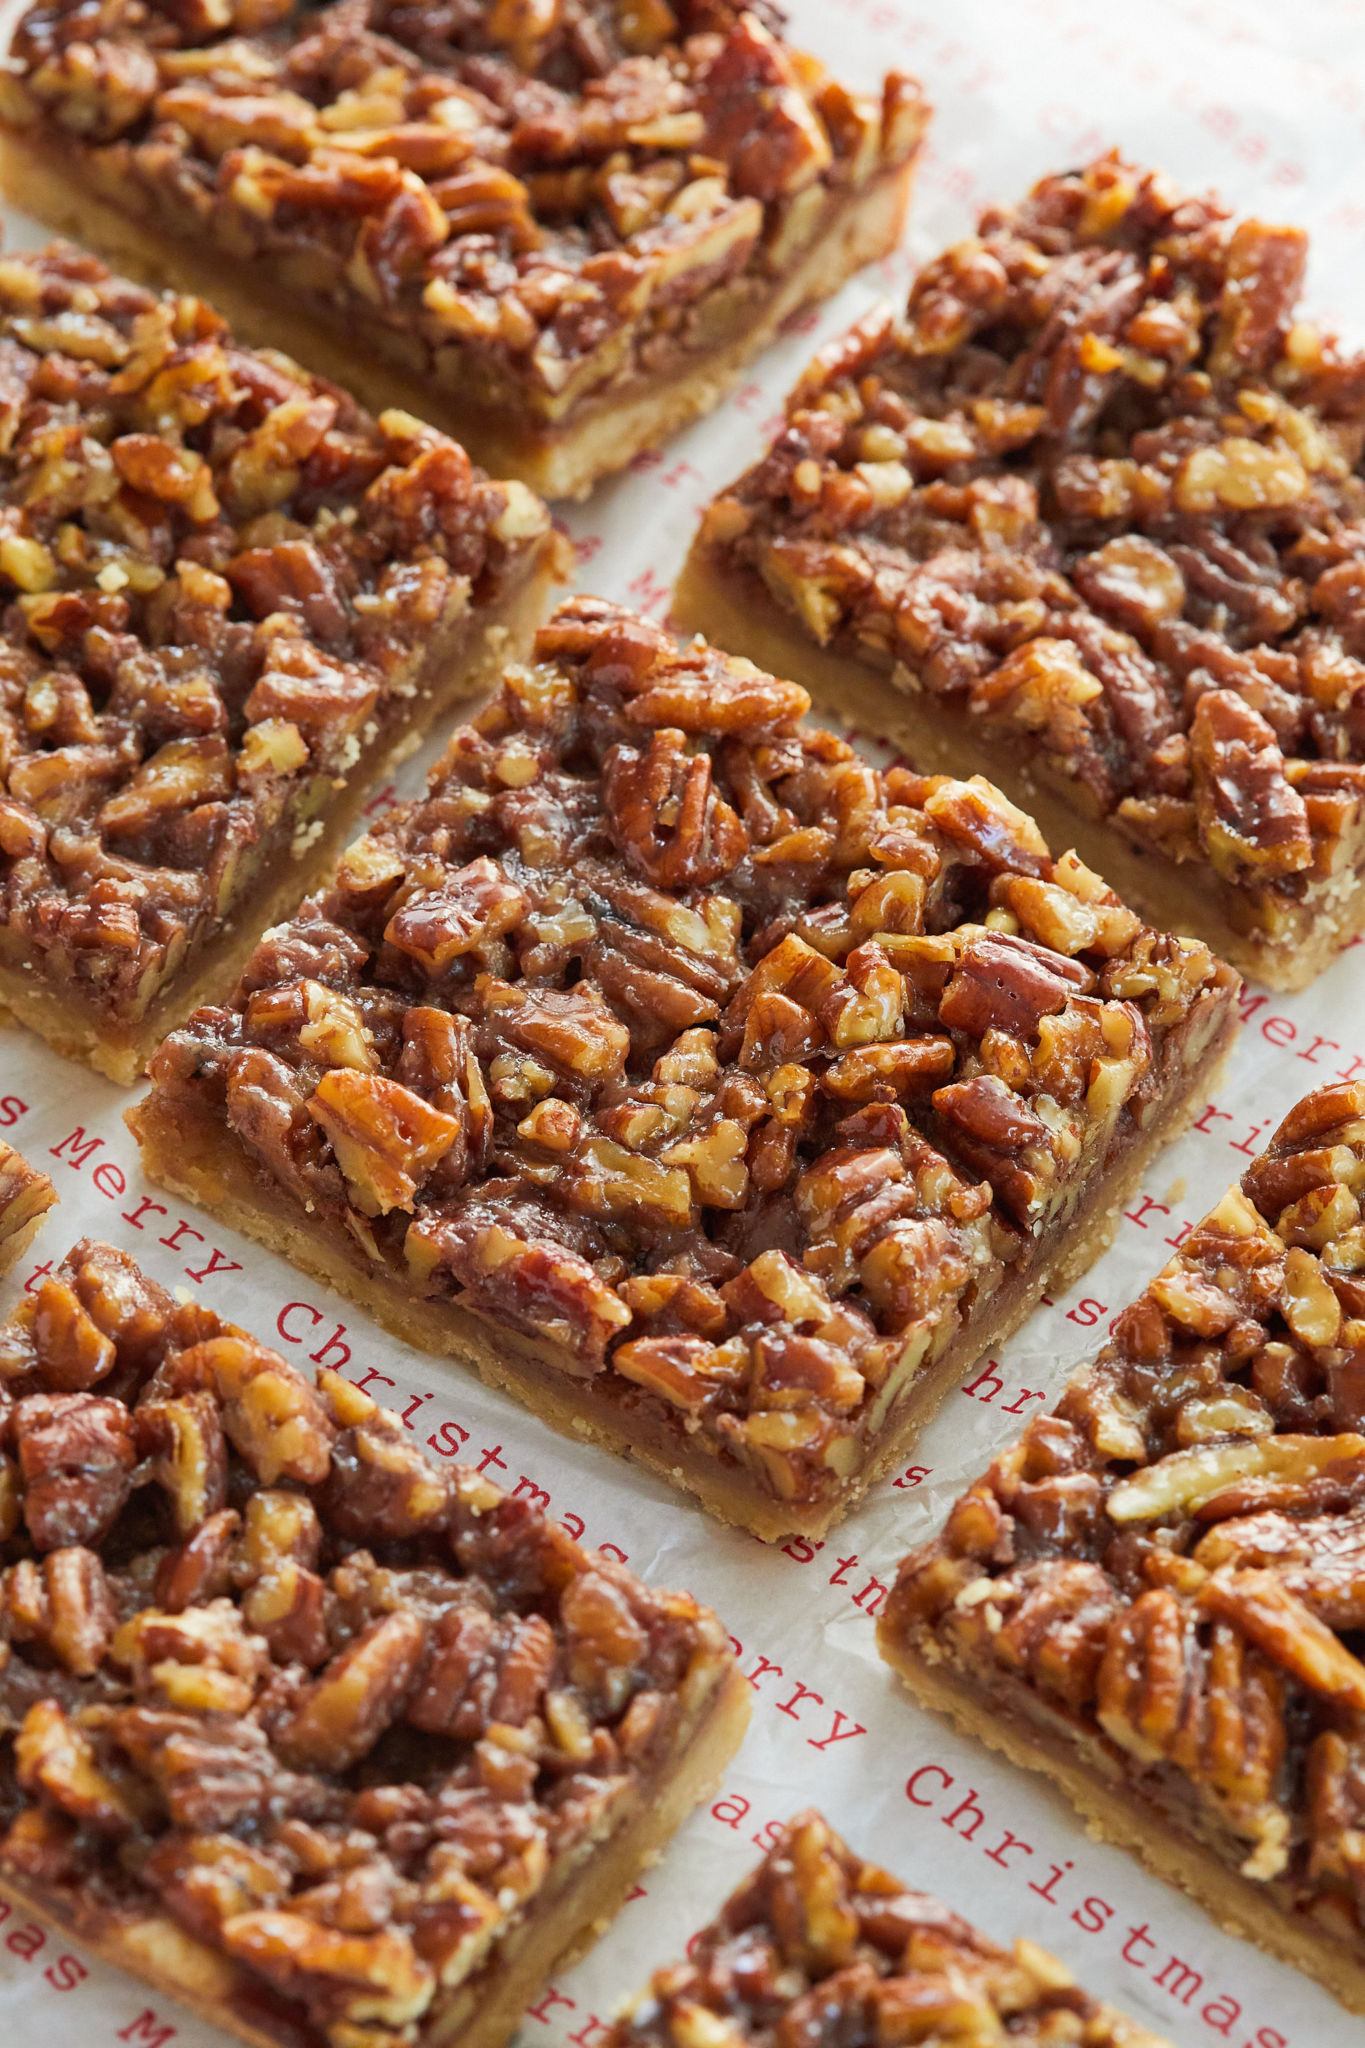 A close up of my Festive Maple Pecan Bars.